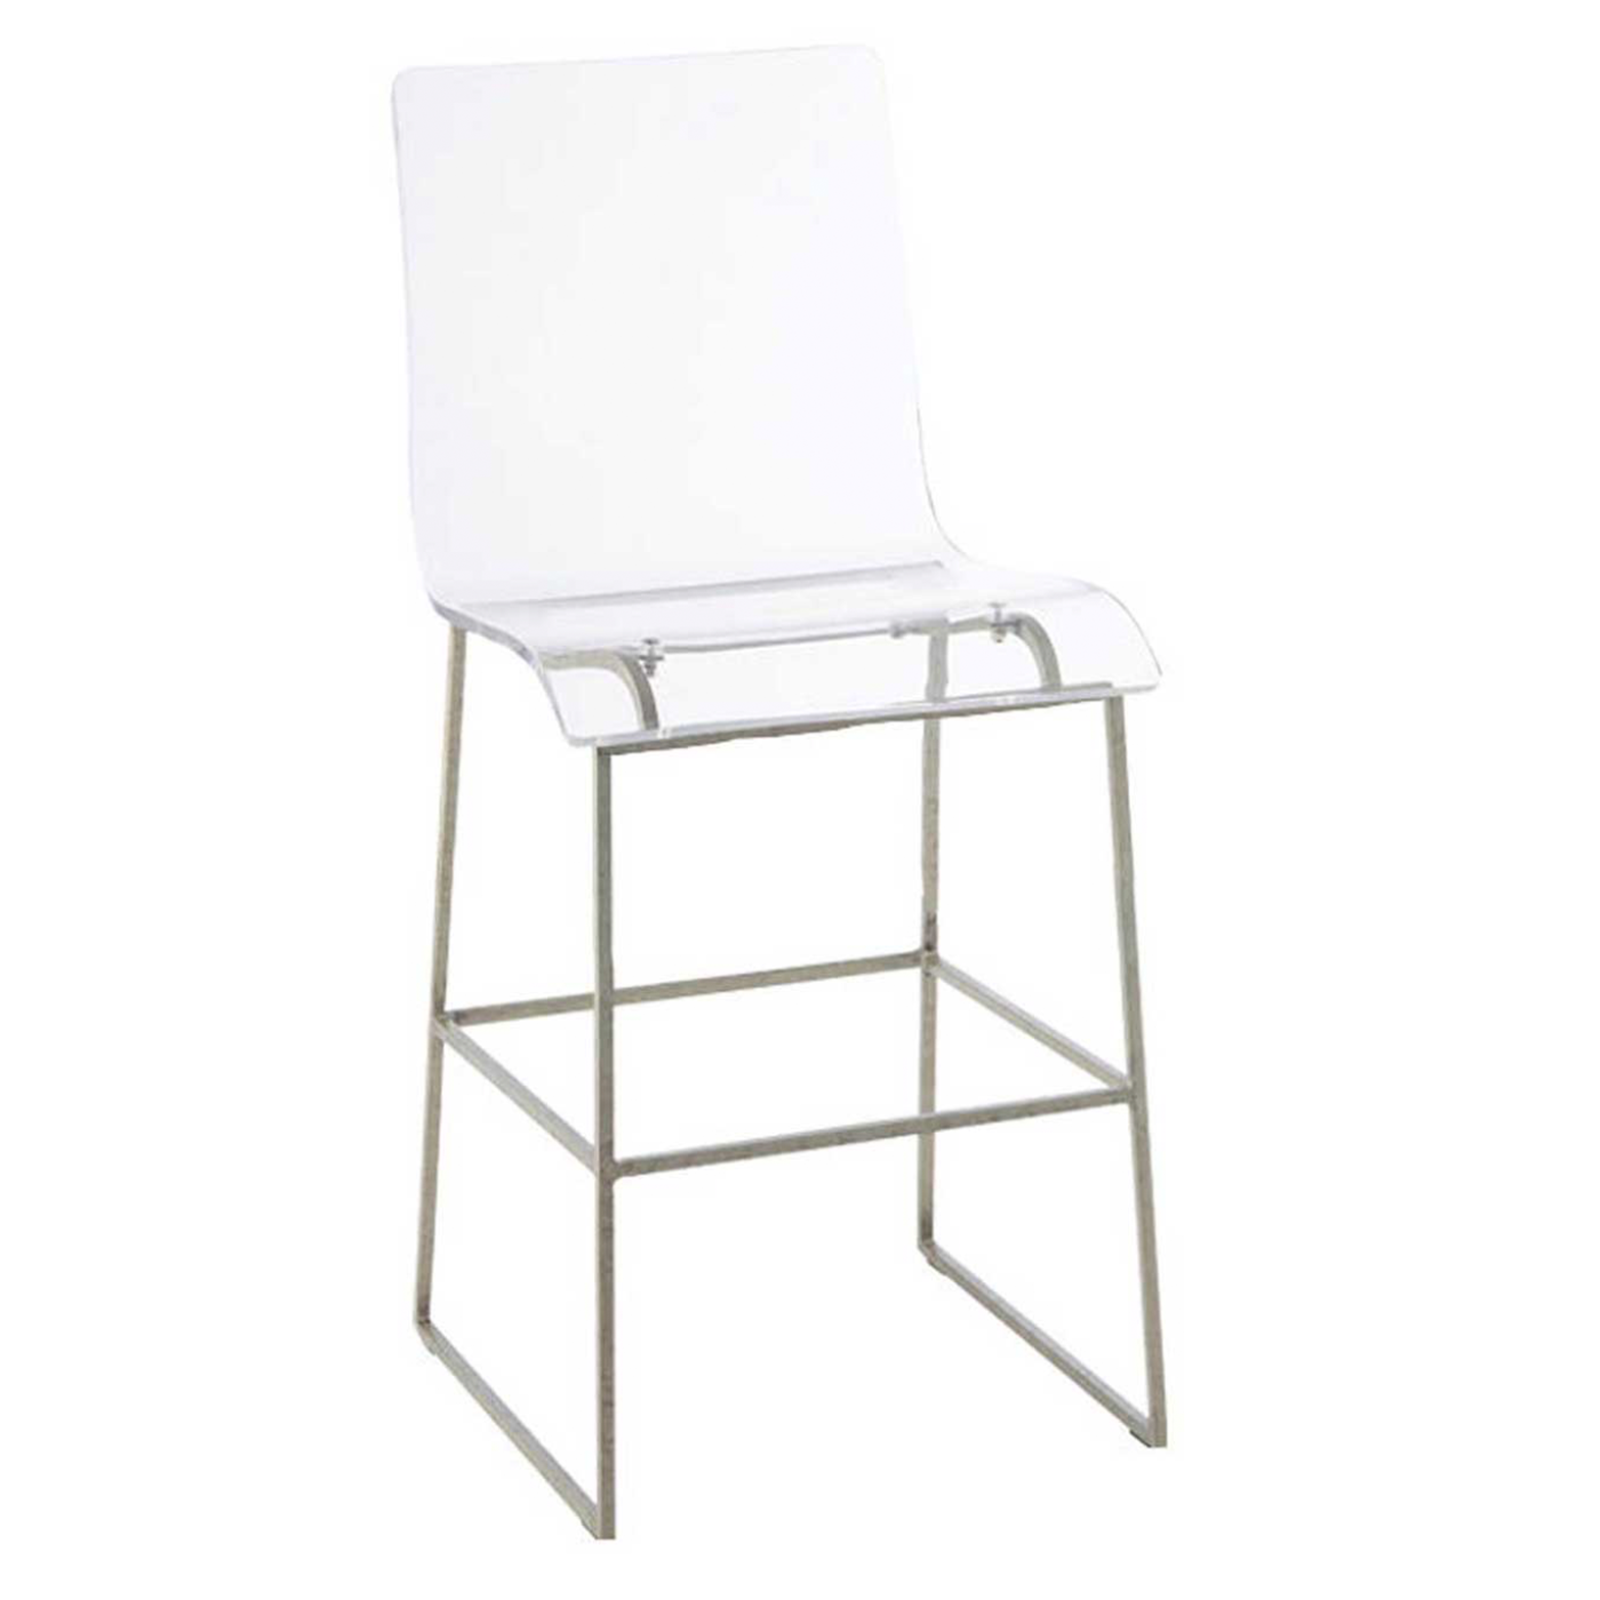 King Counter Stool - Silver